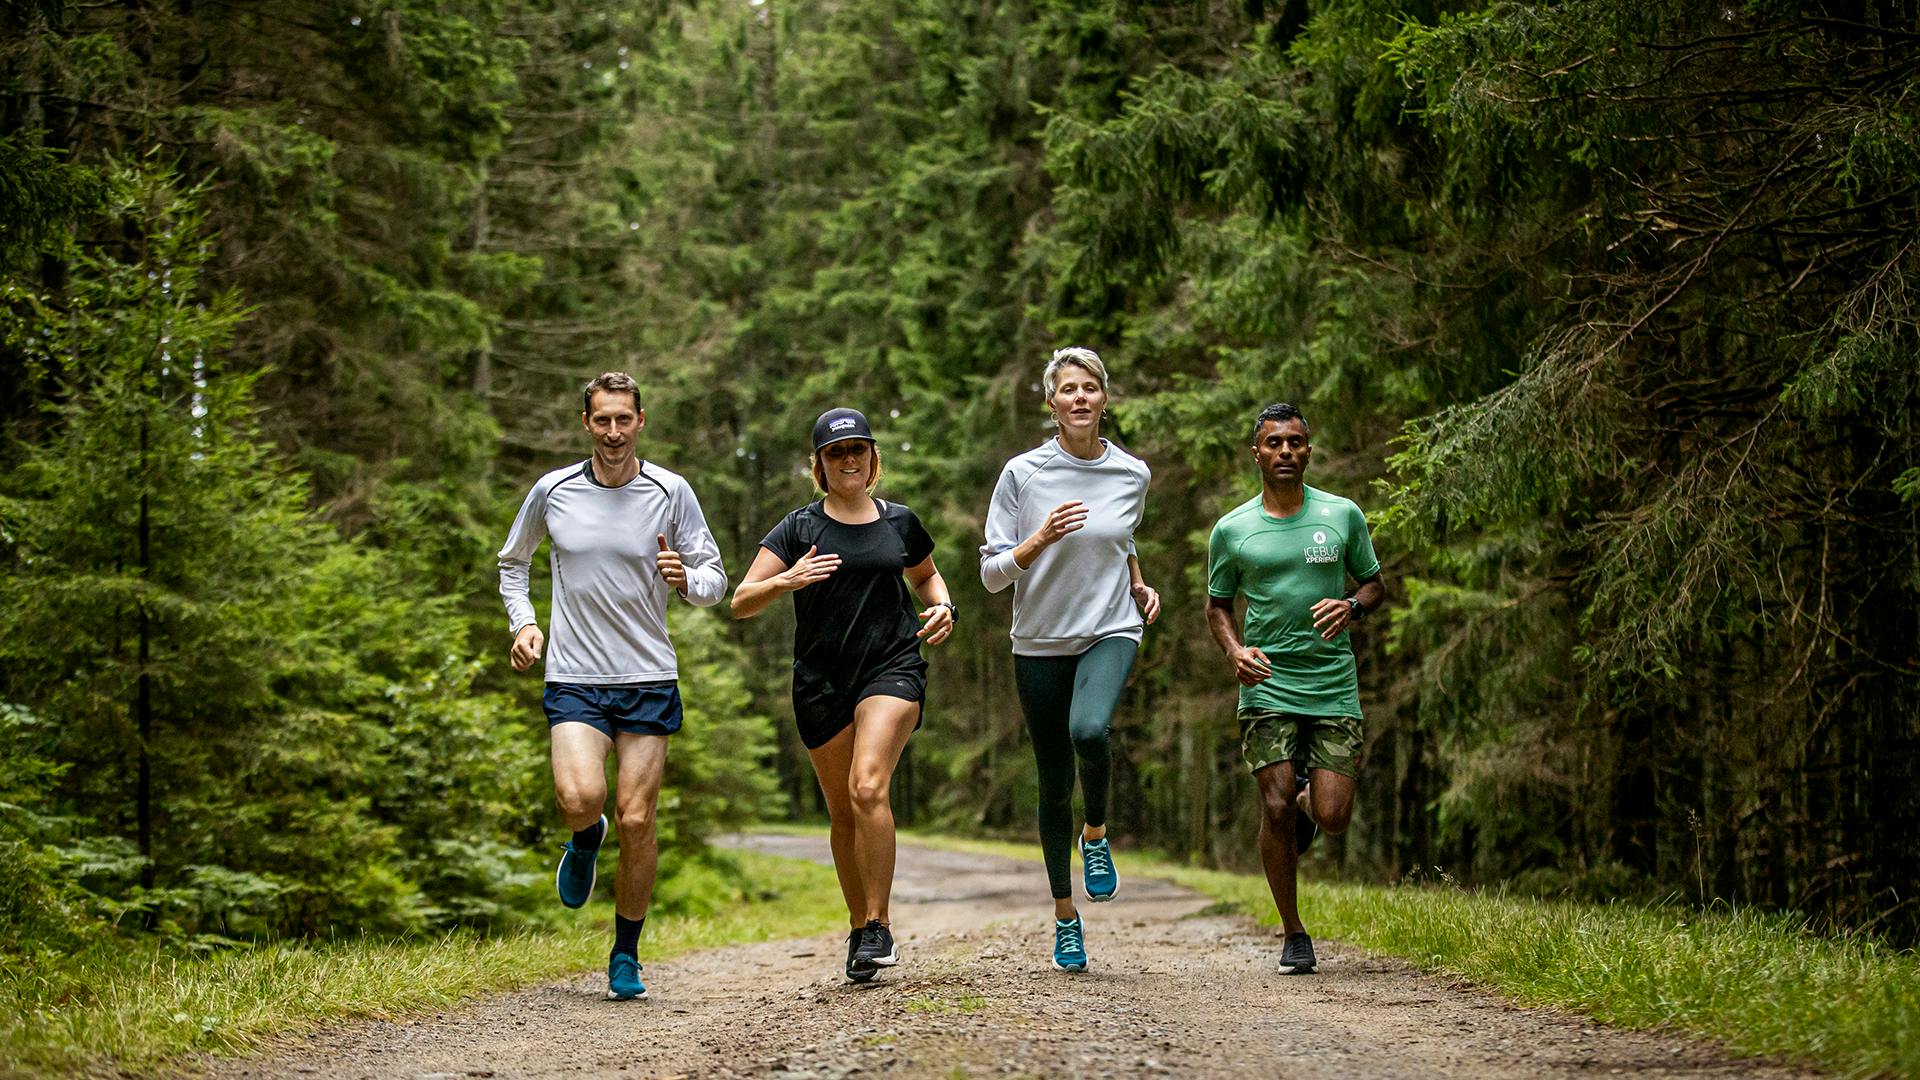 a group of people running down a trail in the forest wearing Icebug running shoes